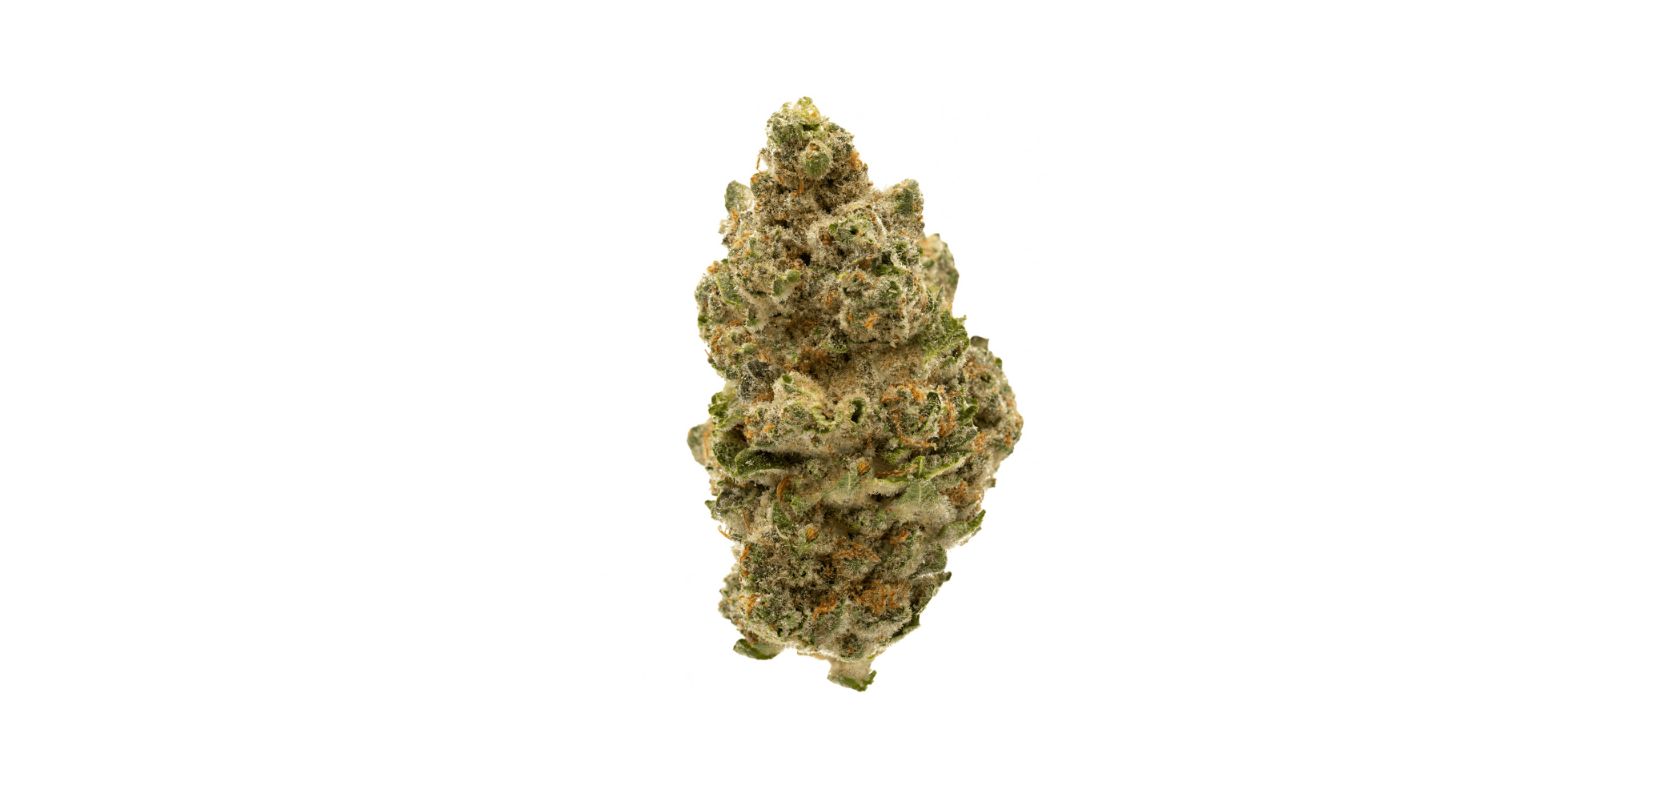 In this in-depth Do Si Do strain review, we will explore all you need to know about this popular strain, this includes its origins, genetics, and effects. 